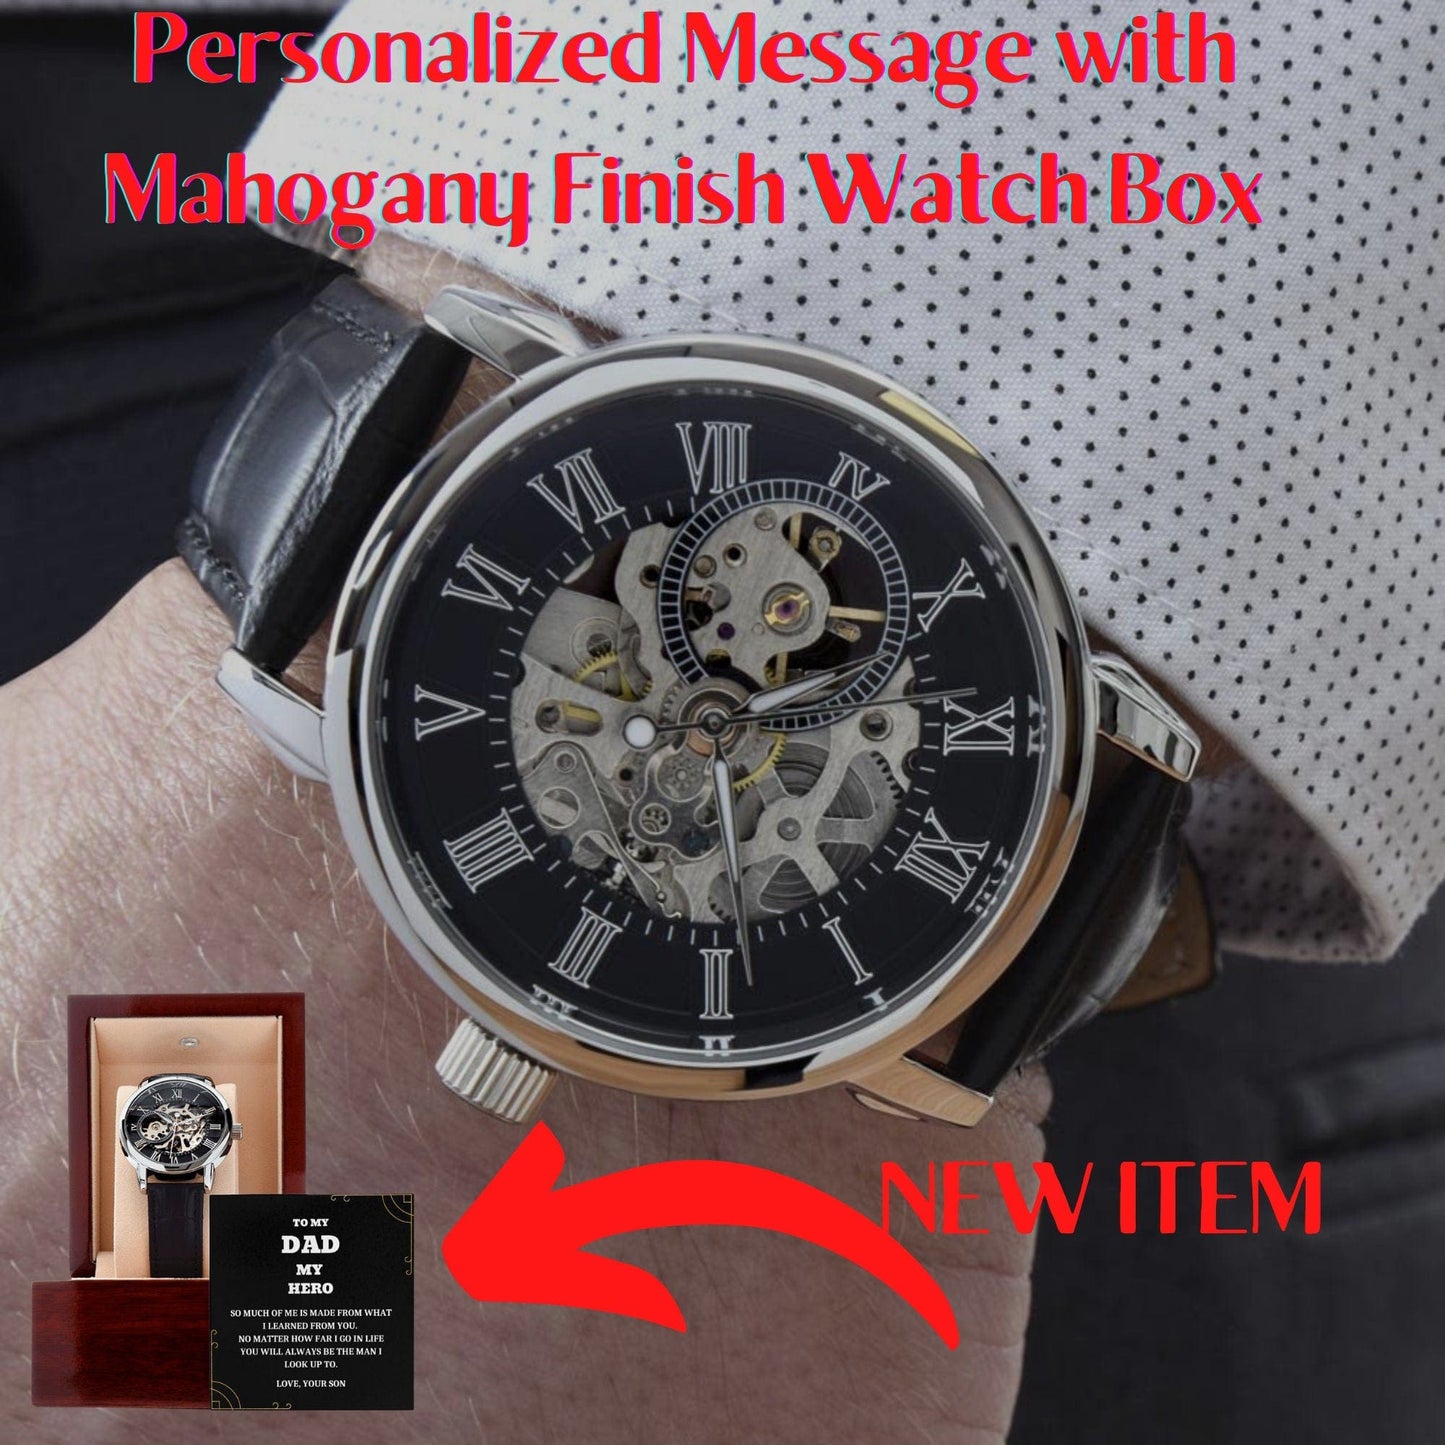 Personalized gift watch with Watch box